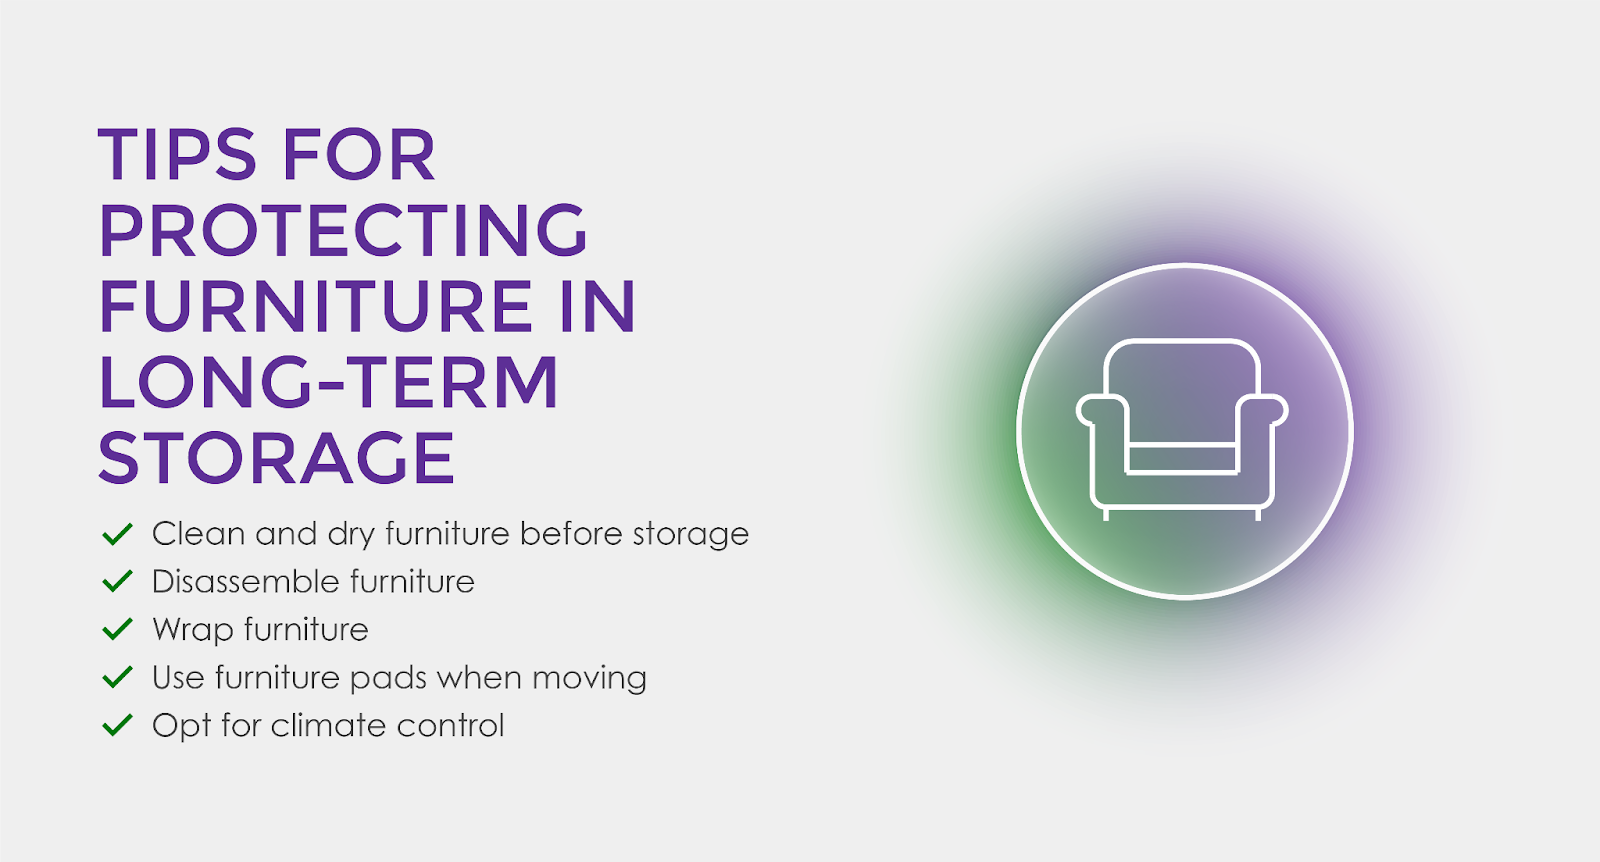 Tips for protecting furniture in long-term storage